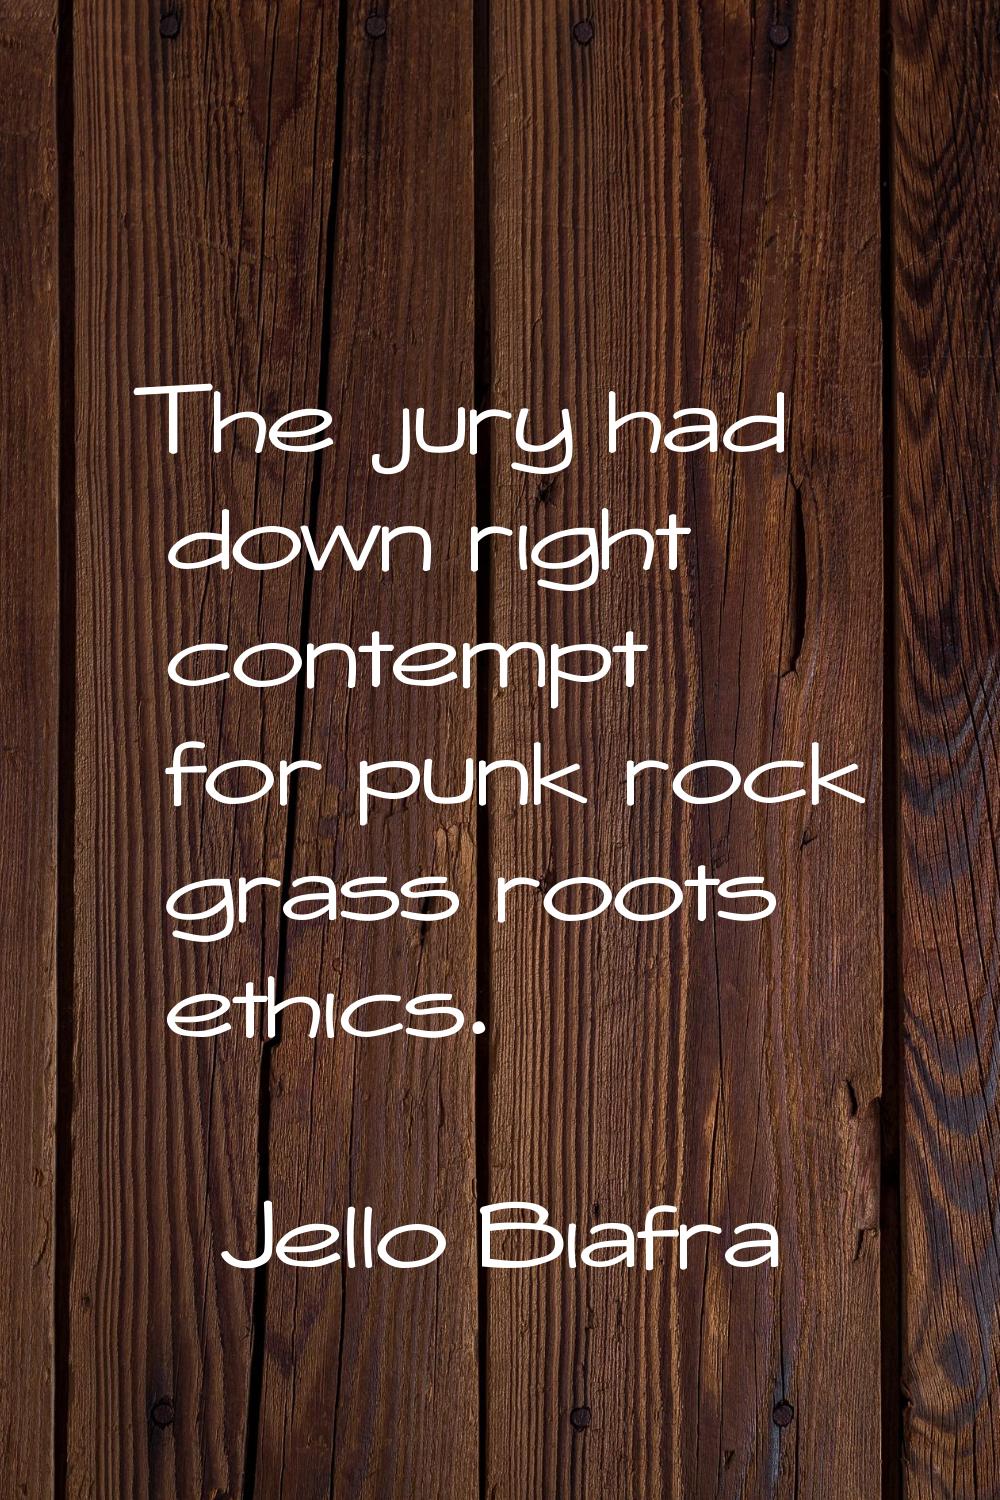 The jury had down right contempt for punk rock grass roots ethics.